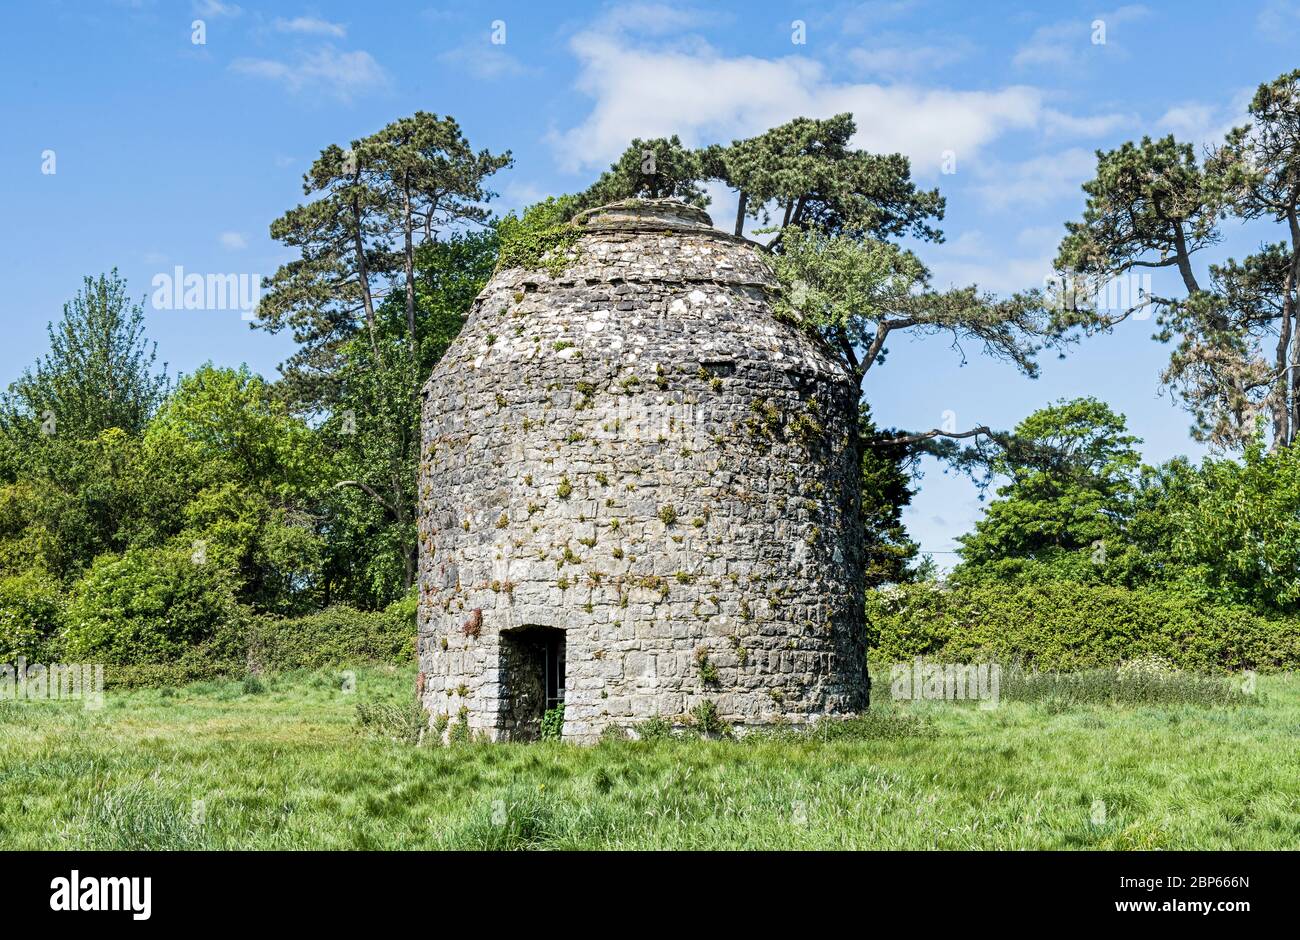 The Dovecote, or Columbarium, in Llantwit Major in the Vale of Glamorgan, South Wales. Stock Photo